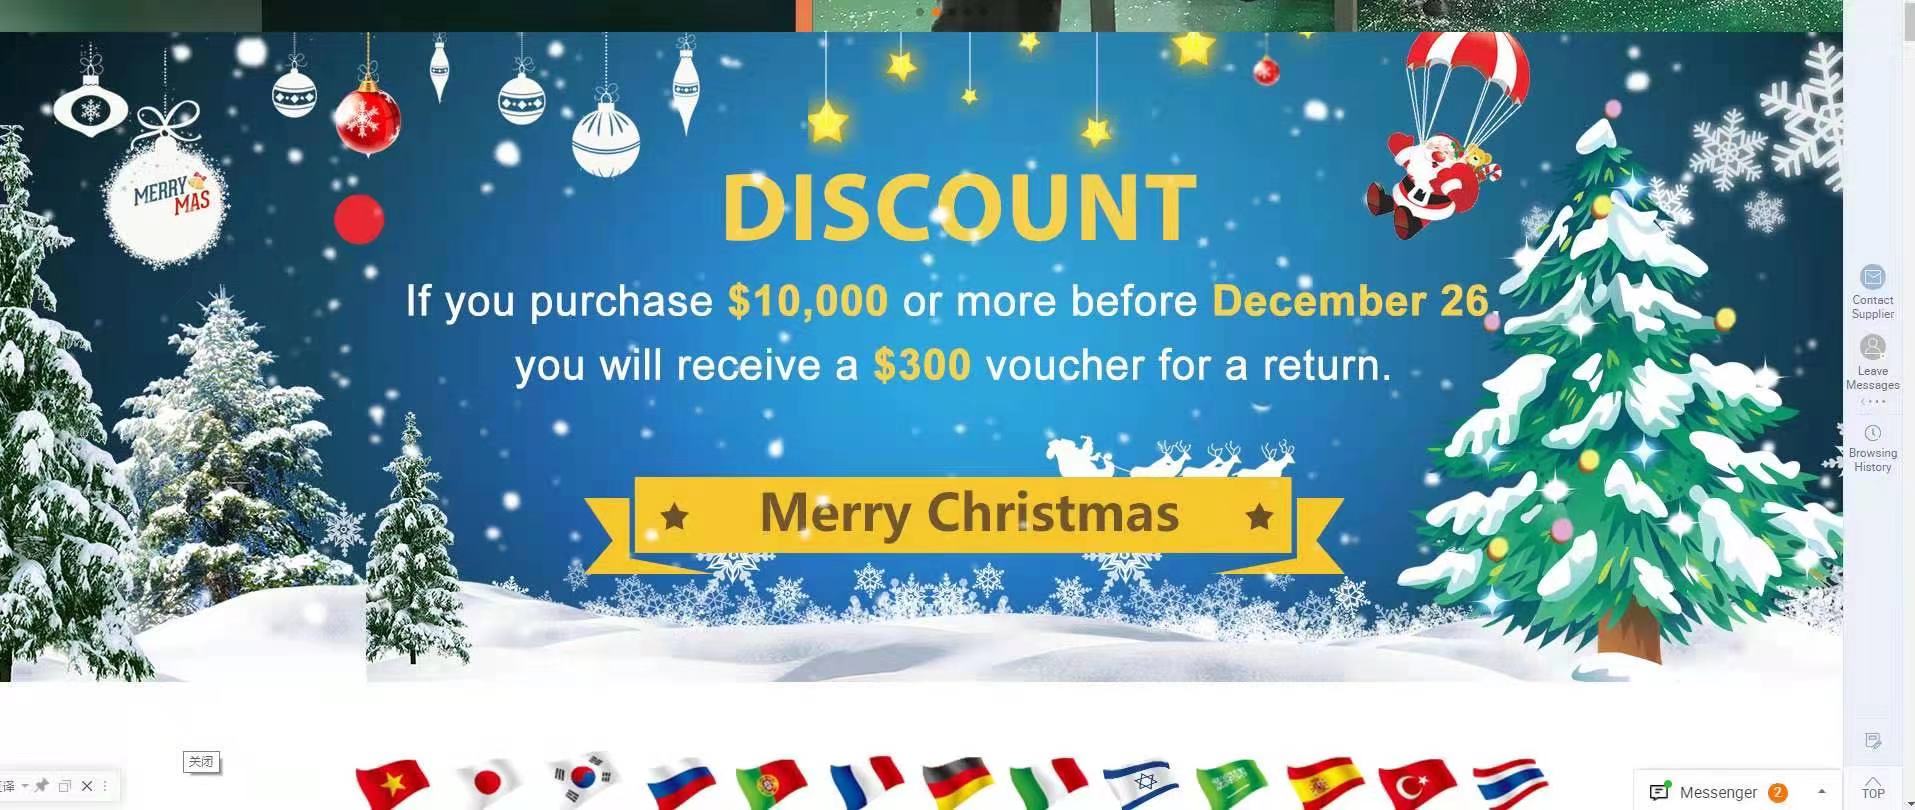 Discount for December